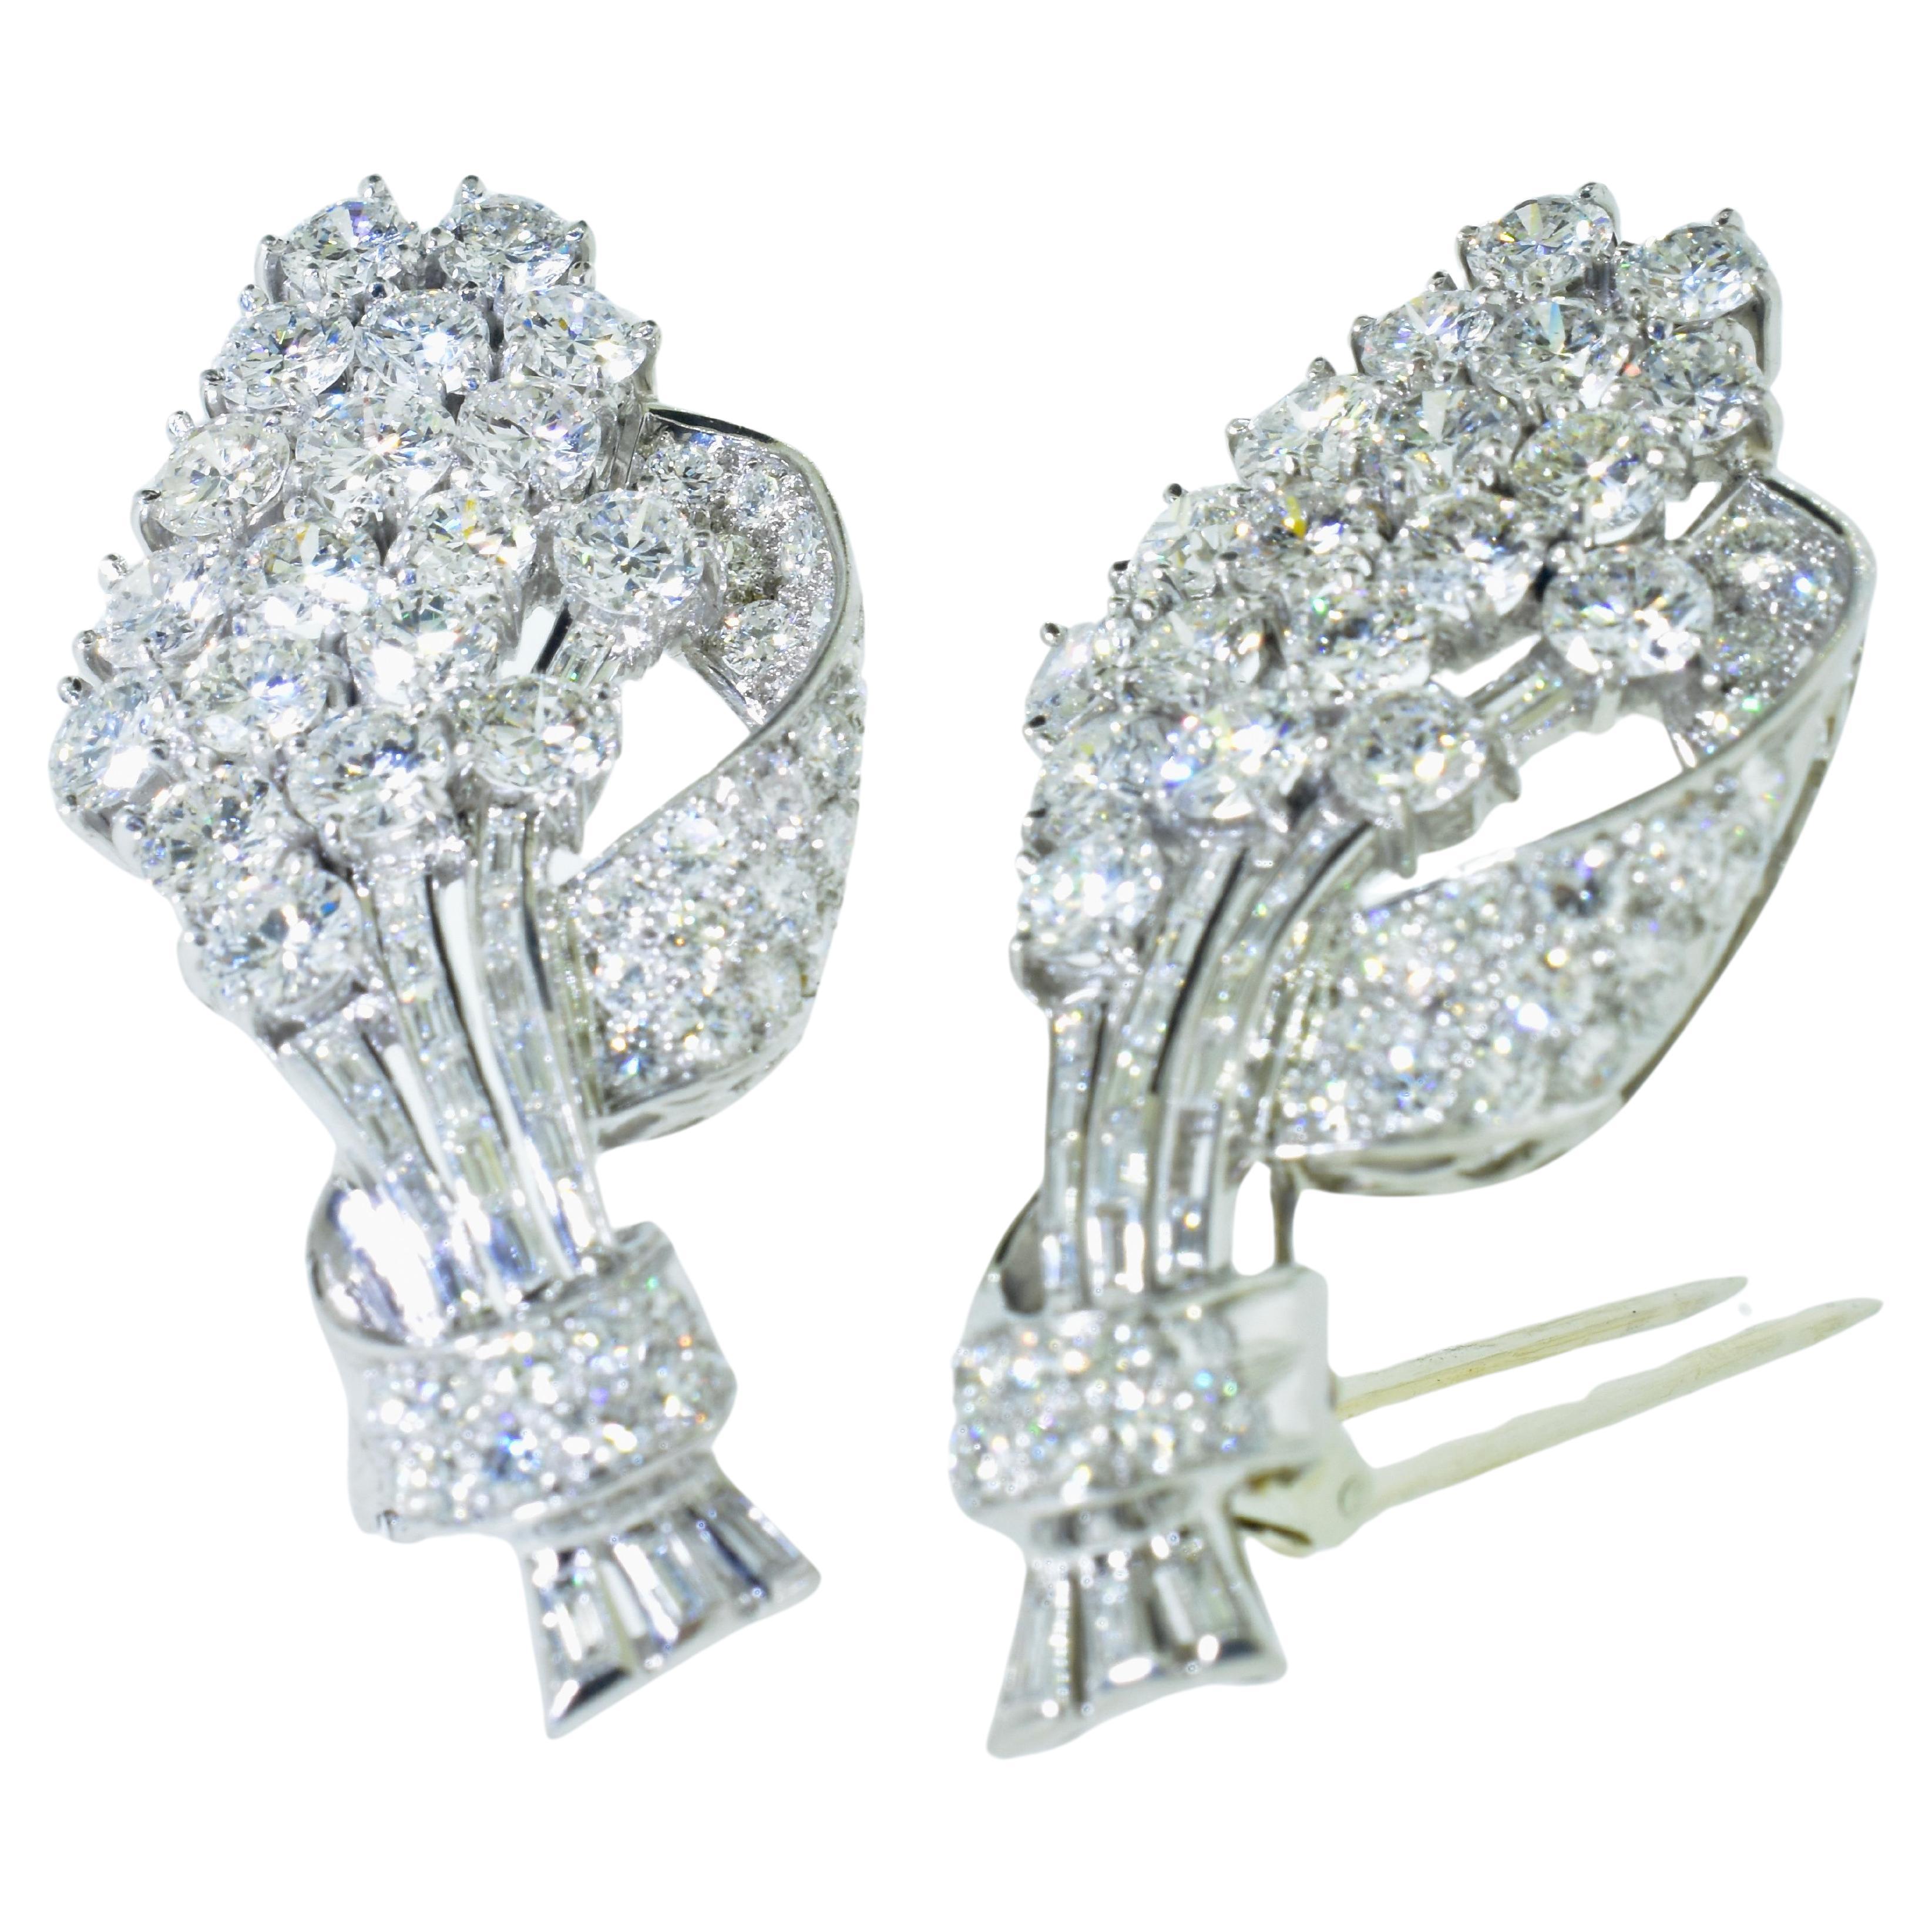 Art Deco Diamond Brooch and Dress Clips in platinum. Well made with fine white diamonds, this brooch can be separated into two stylish dress clips. There are an estimated 10 cts of near colorless, G/H in both European cut diamonds and baguette cut